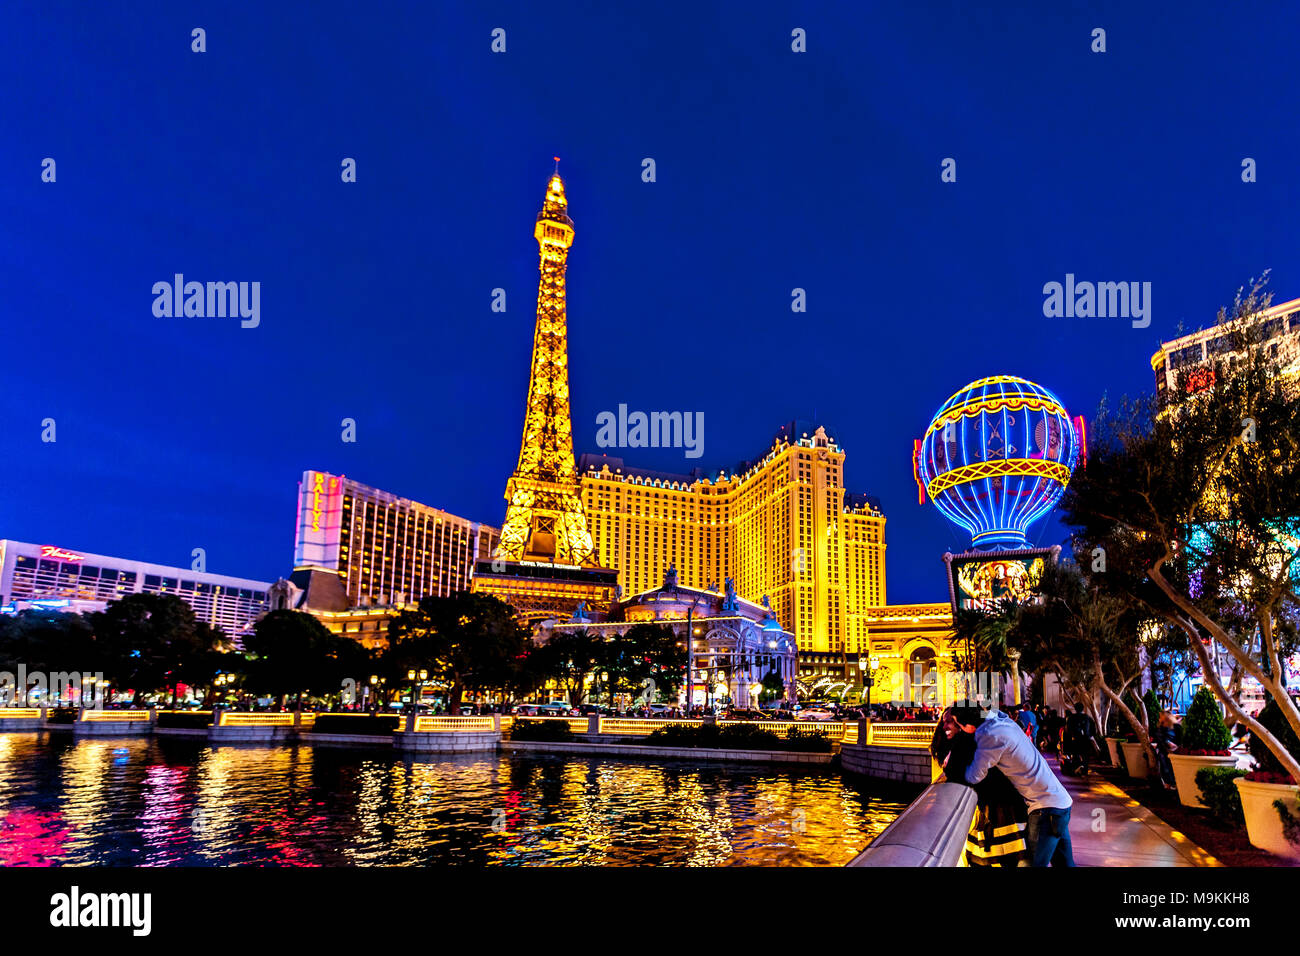 Eiffel Tower Restaurant in Las Vegas Editorial Stock Photo - Image of  boulevard, attraction: 44932443